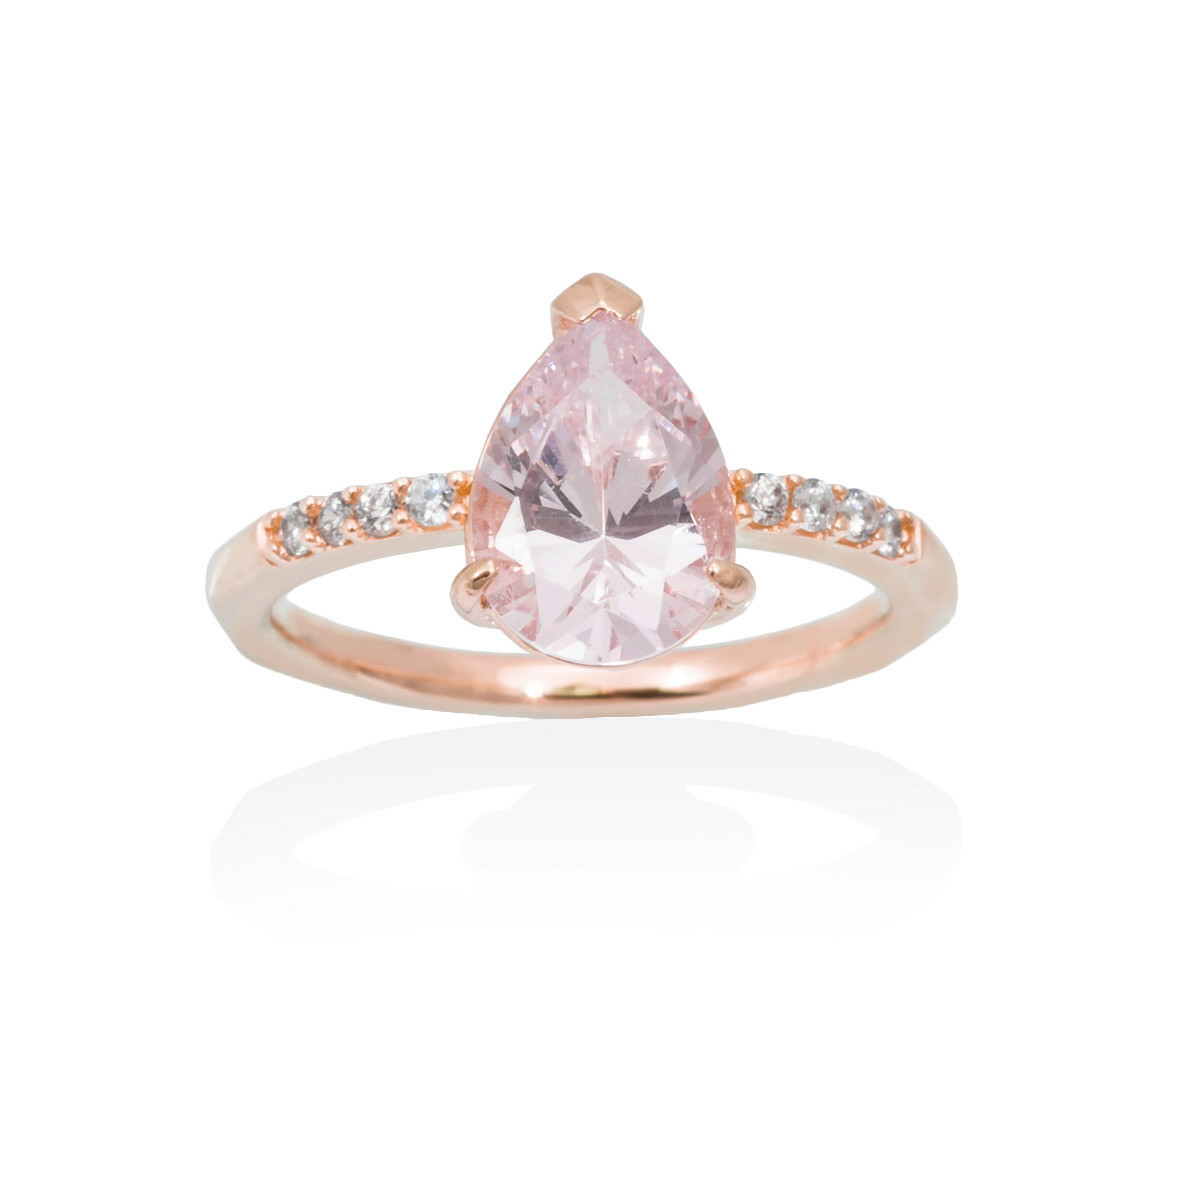 PINK ORLEANS RING IN PINK SILVER